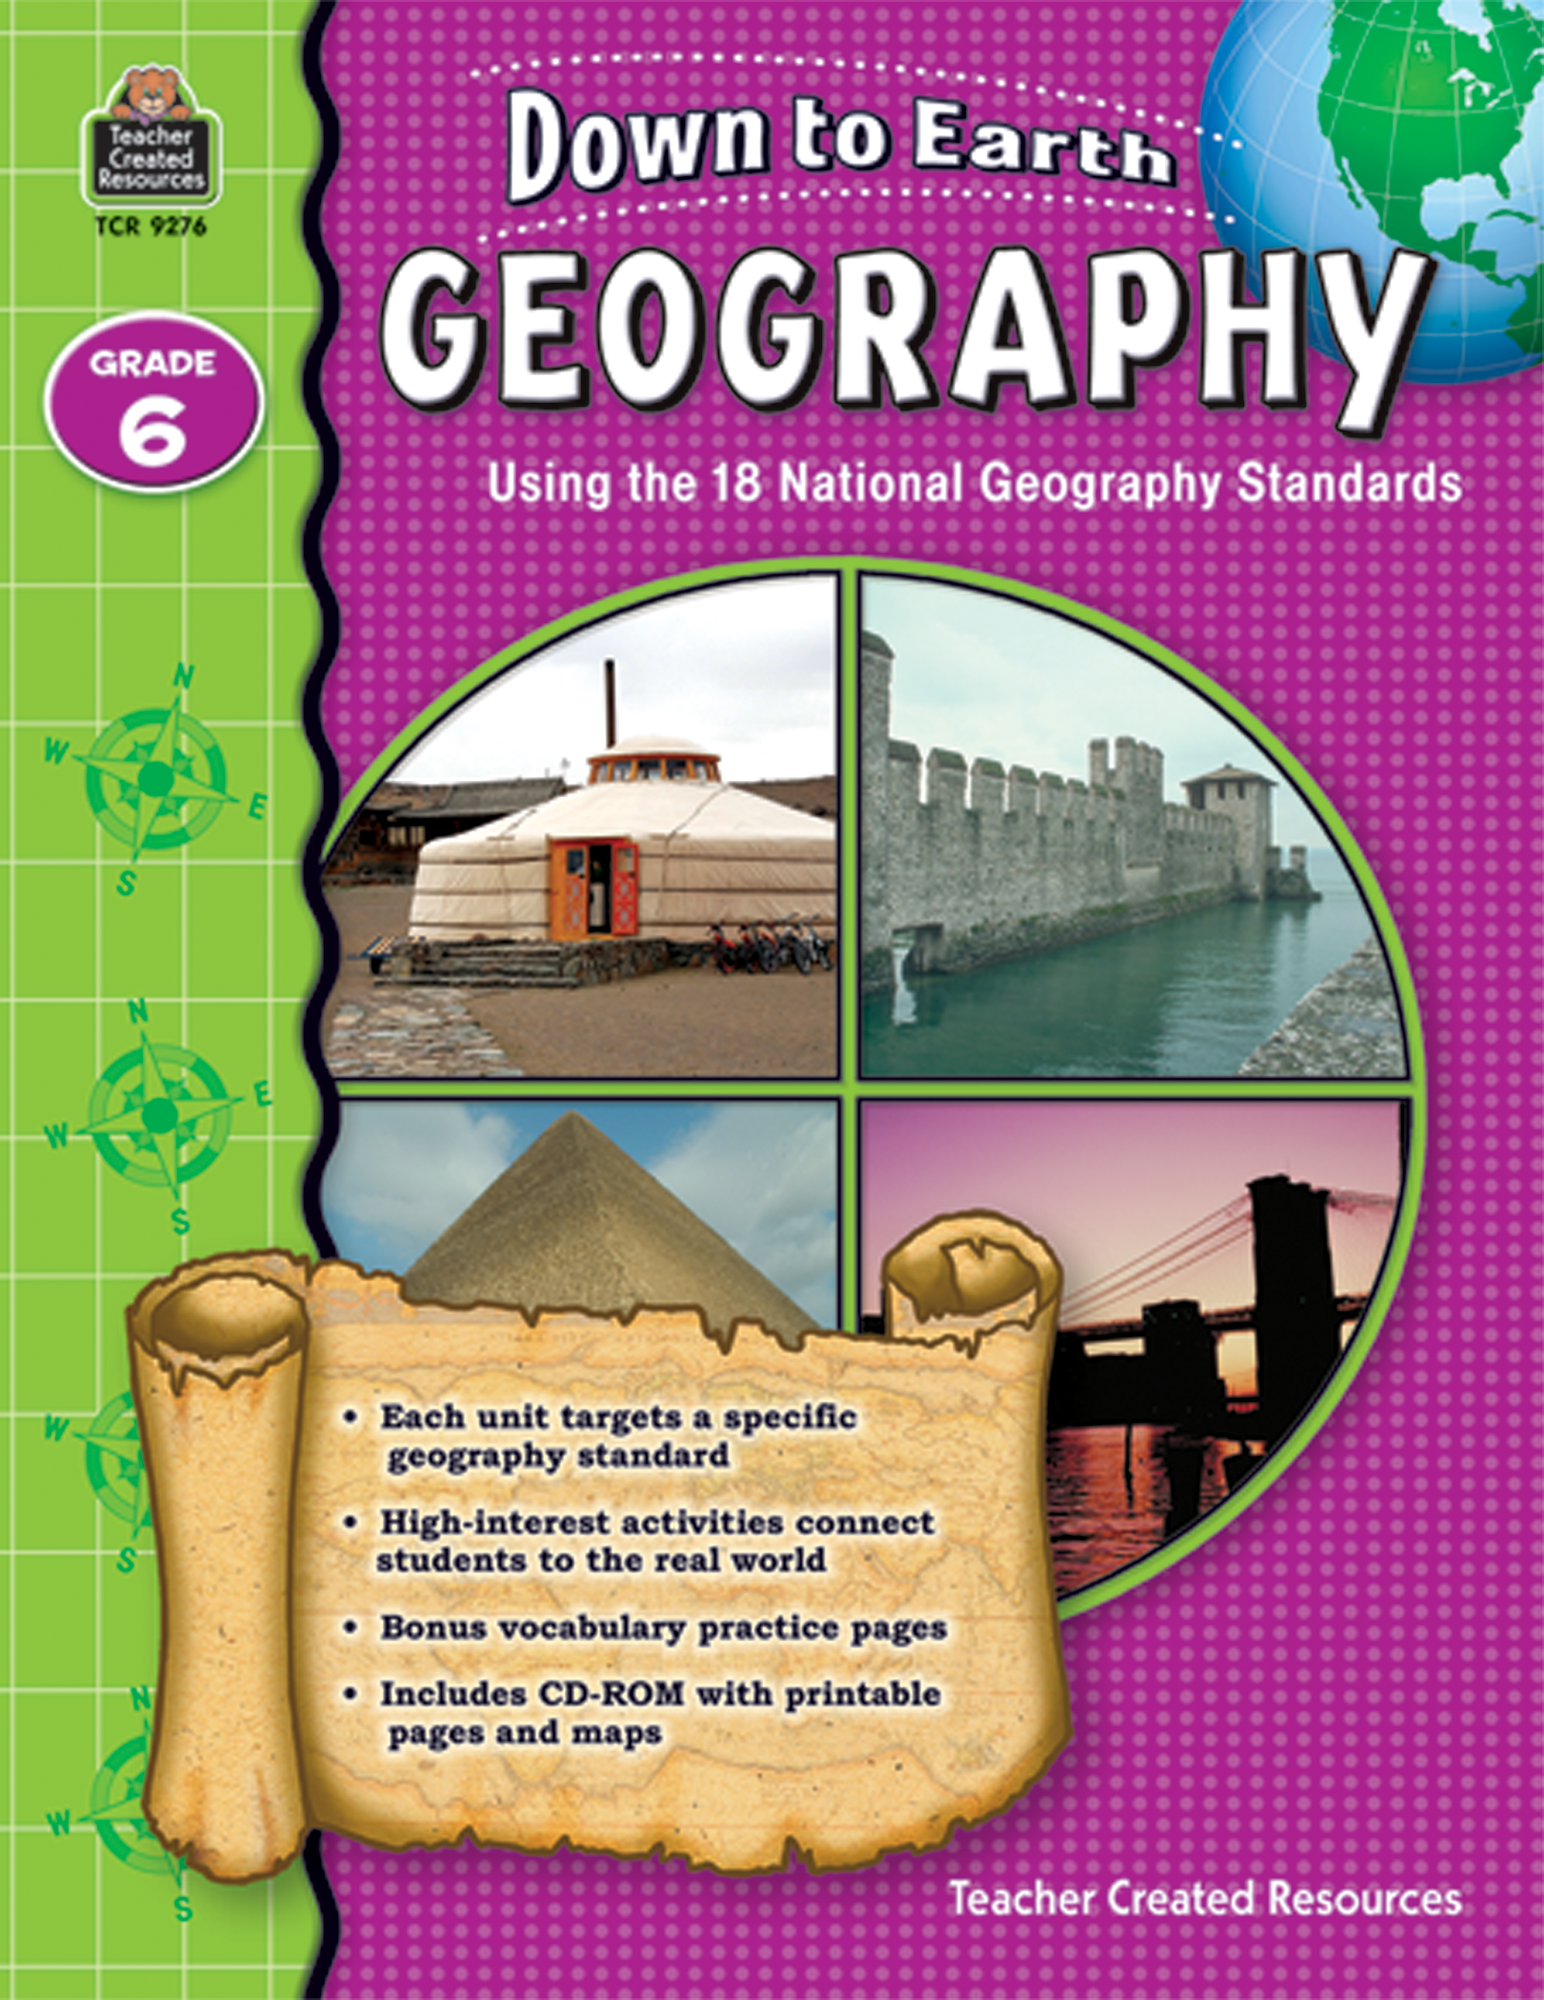 World Geography Textbook